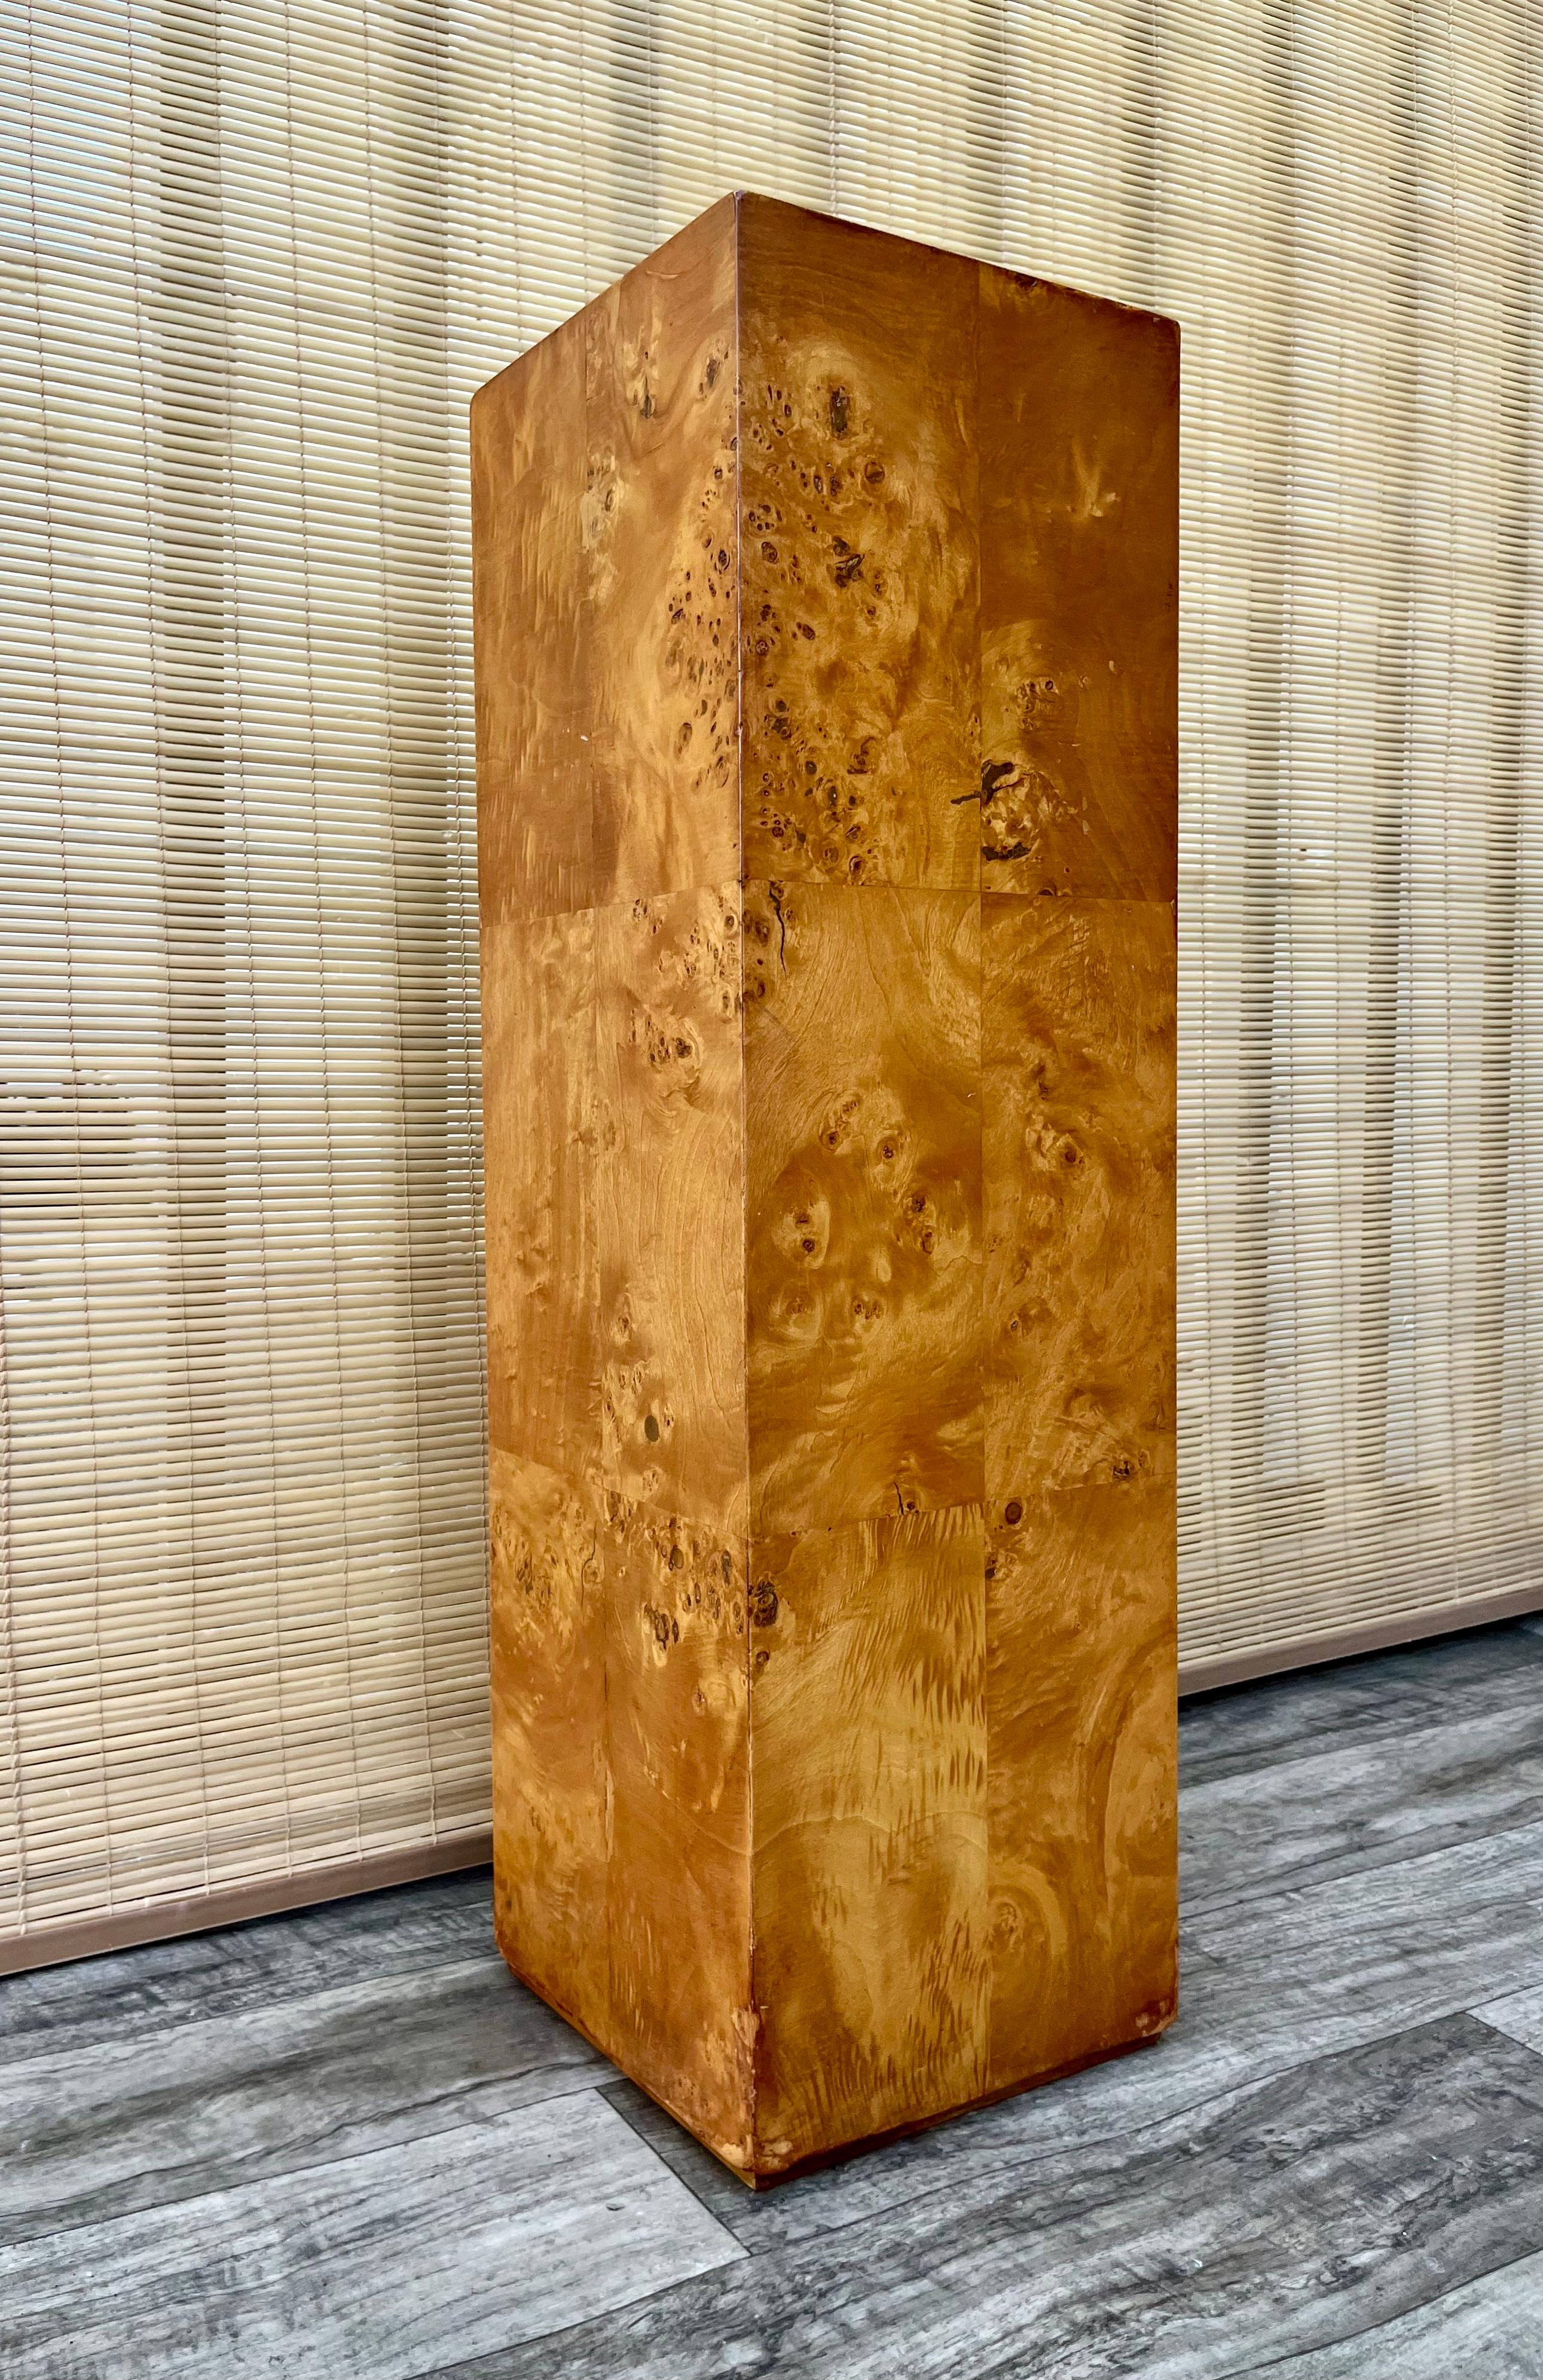 1960s Mid Century Modern Burl Pedestal / Column in the Milo Baughman Style. 
Features a rich olive burl wood veneer and a brutalist inspired design. 
In good restored condition with minor signs of wear consistent with age and history. Please see